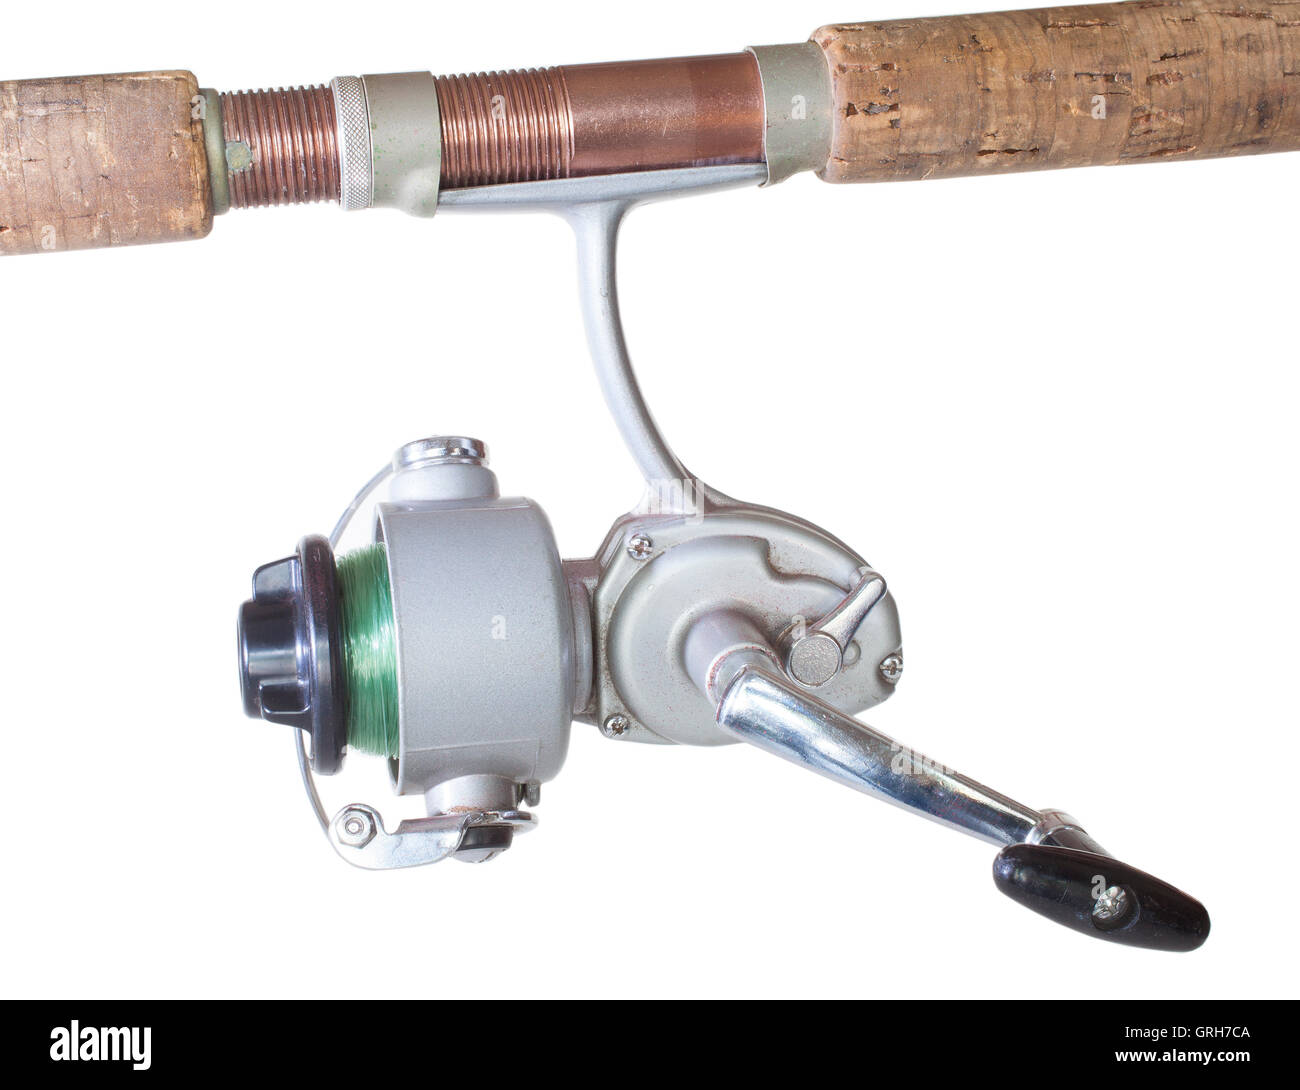 fishing reel made out of metal that goes underneath the rod Stock Photo